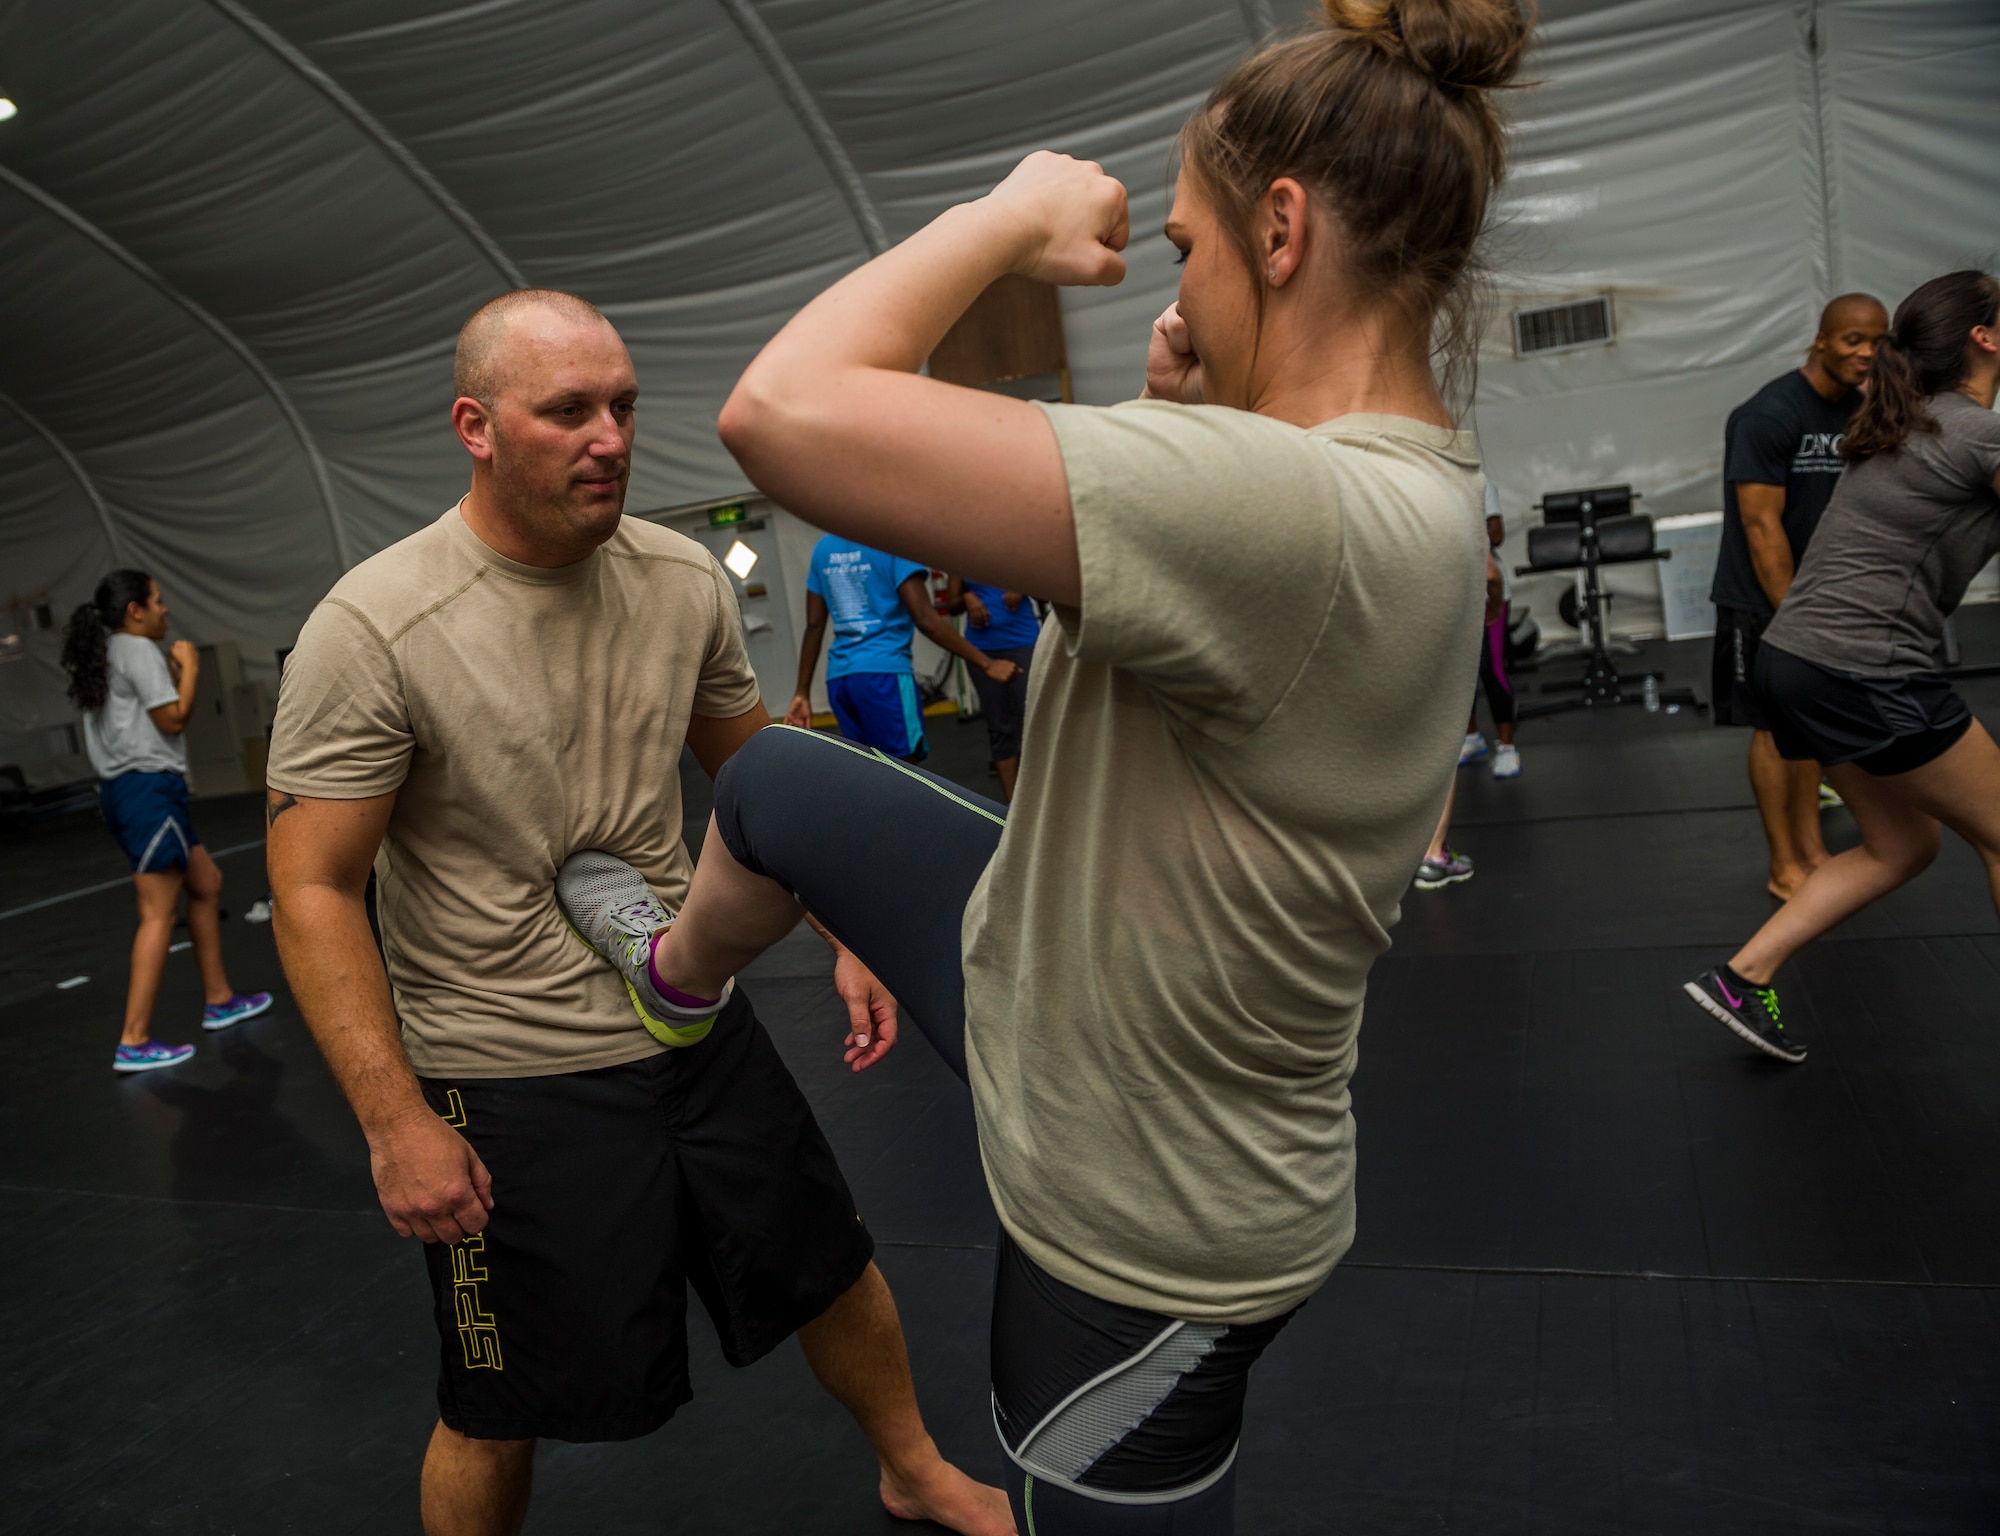 U.S. Air Force Master Sgt. Patrick Smith, 386th Air Expeditionary Wing Check Six superintendent, takes a kick to the stomach while teaching Staff Sgt. Rachelle Pritchett, 386th Expeditionary Force Support Squadron, one way to push away an attacker during a self-defense class July 26, 2014 at an undisclosed location in Southwest Asia. The class was designed to better prepare Airmen if they are ever attacked. (U.S. Air Force photo by Staff Sgt. Jeremy Bowcock)